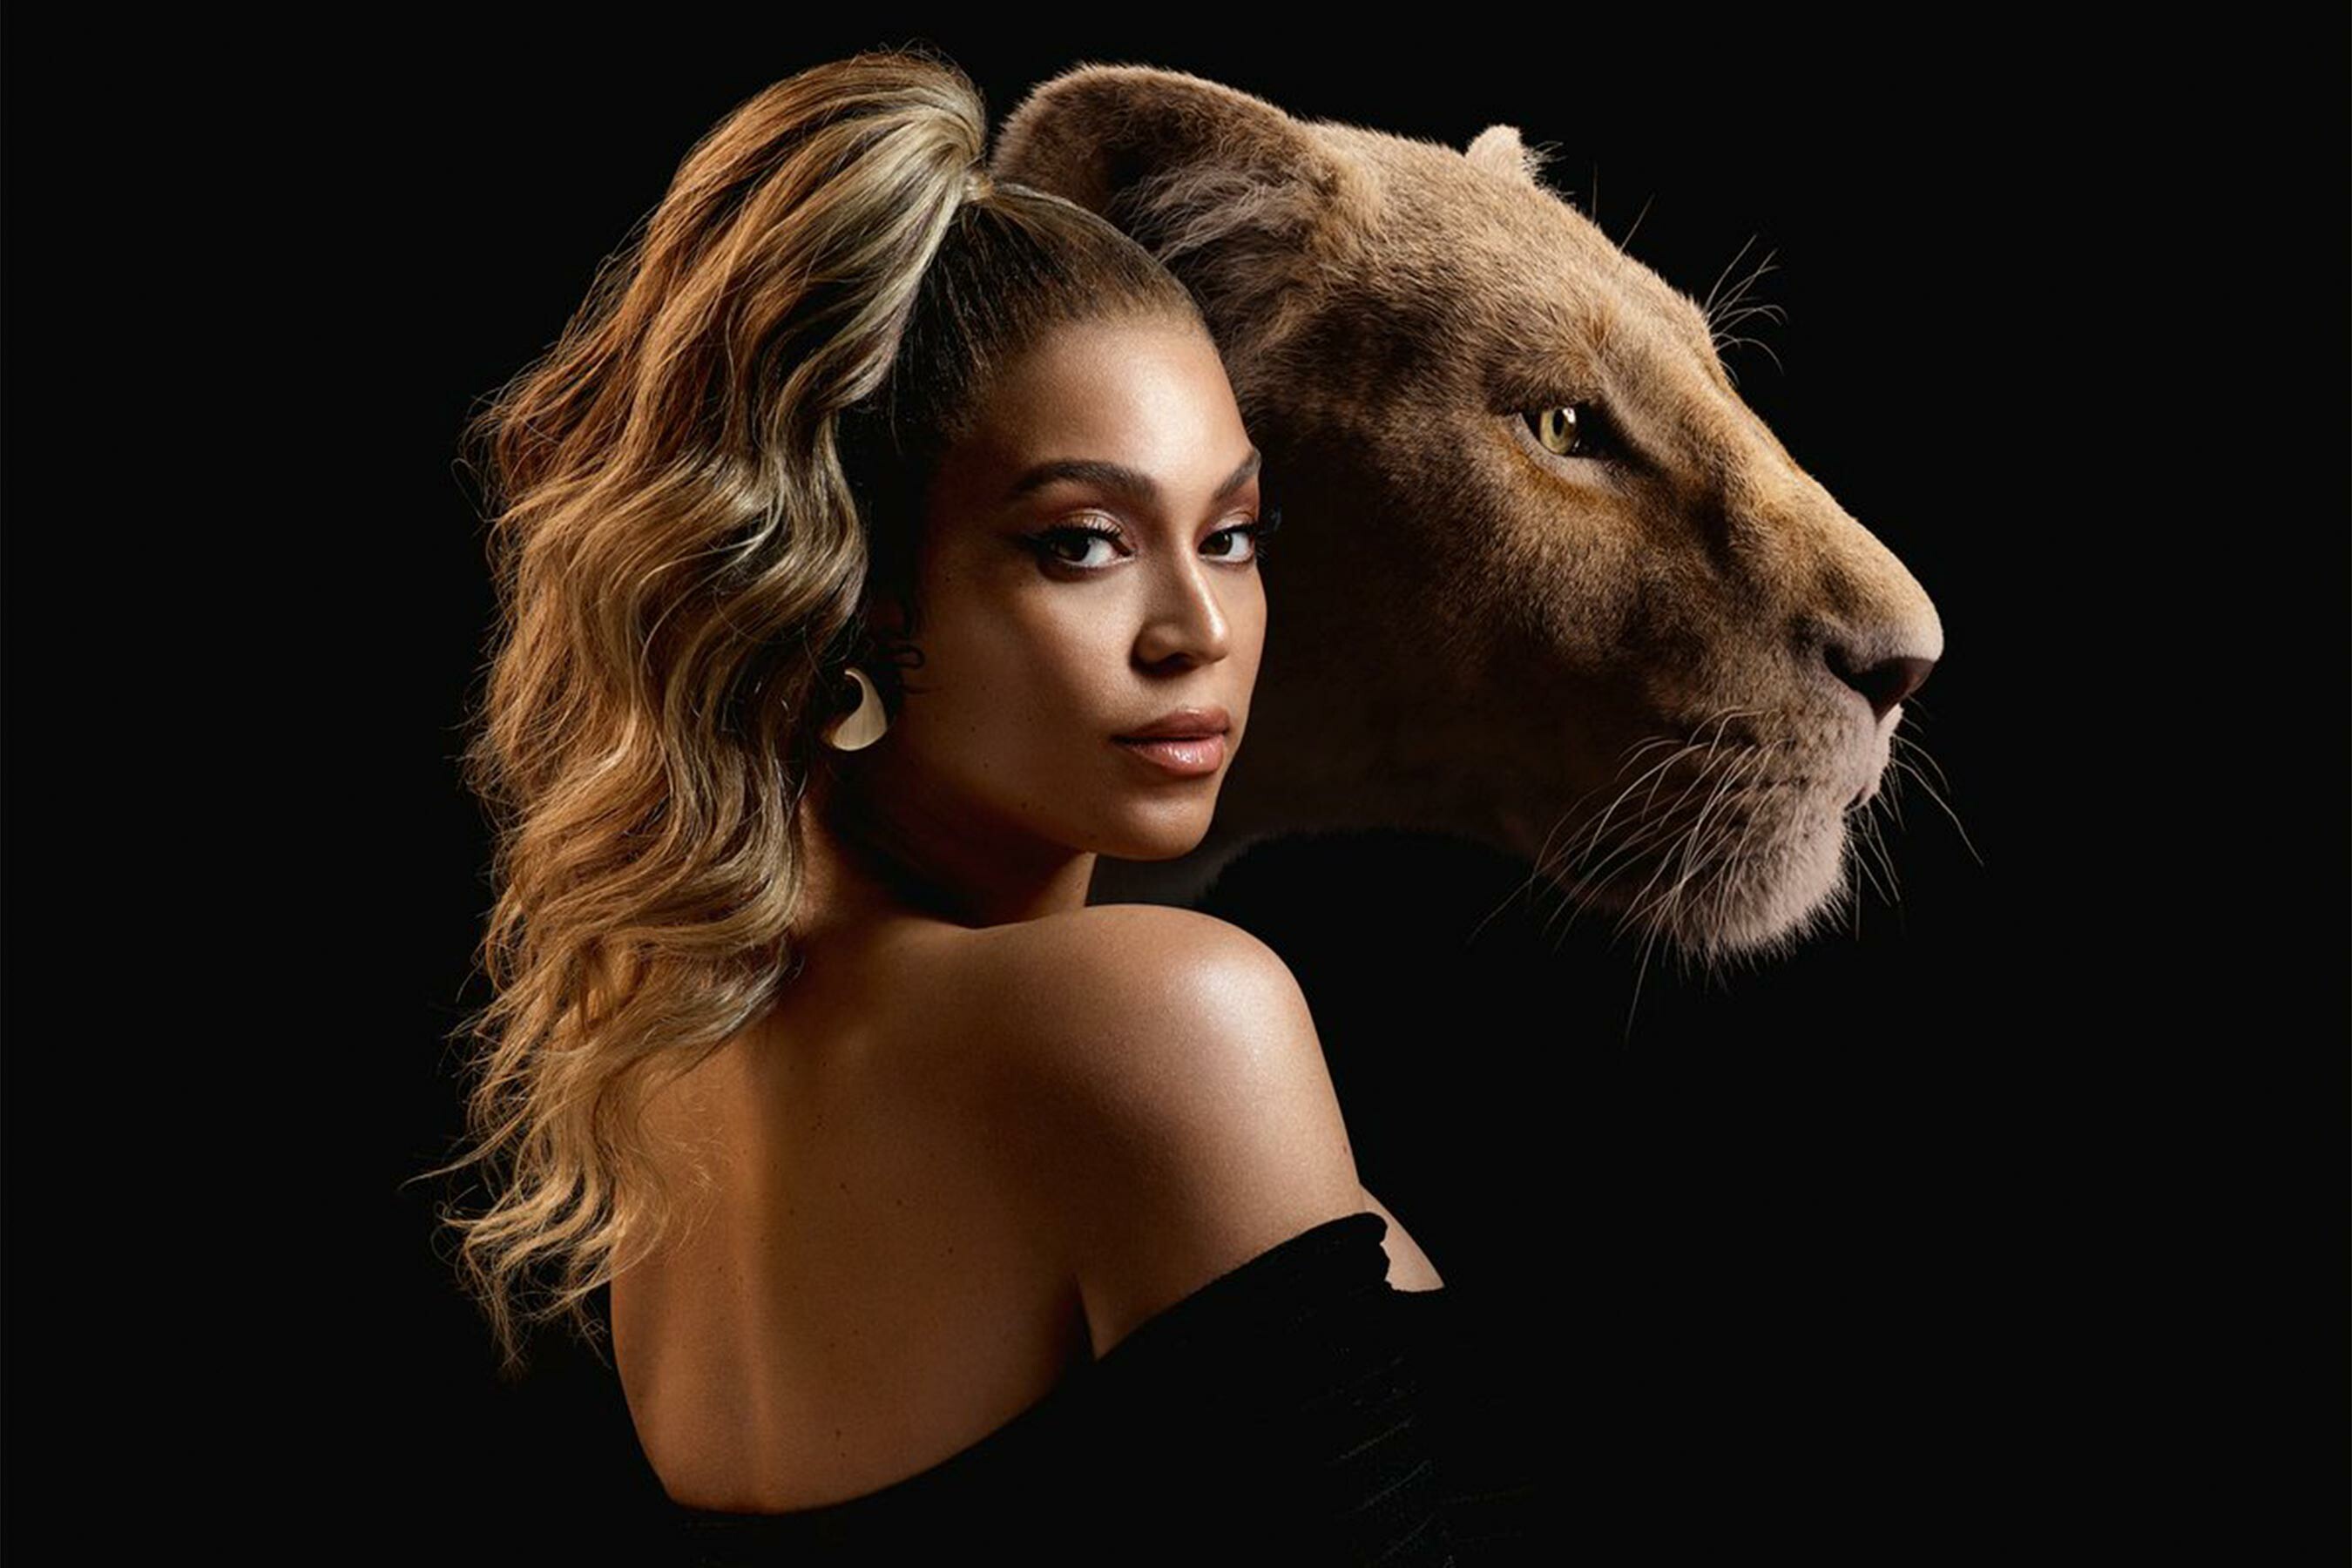 Beyonce: Nala in Disney's 2019 remake of The Lion King, Actress and singer. 2700x1800 HD Wallpaper.